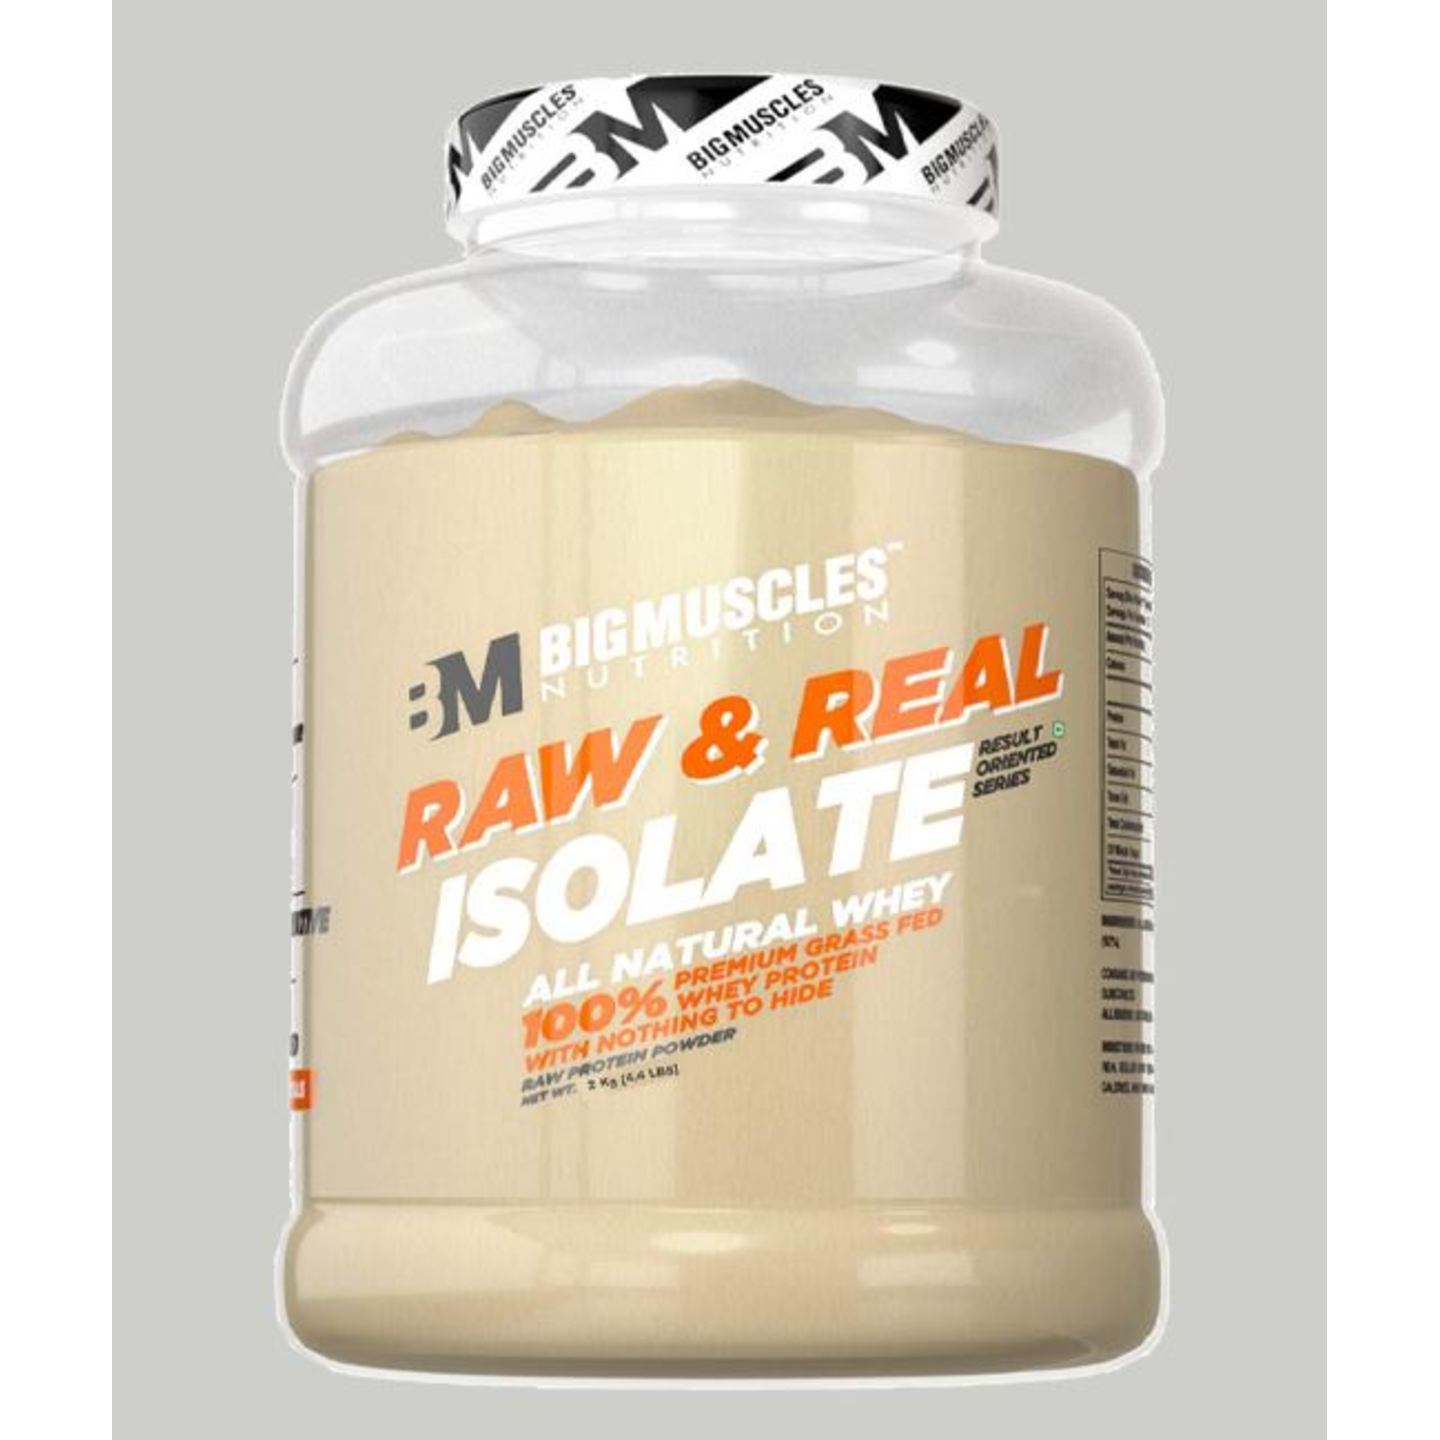 MastMart Bigmuscles Nutrition Raw & Real Isolate Whey Protein Unflavoured 4.4 lbs